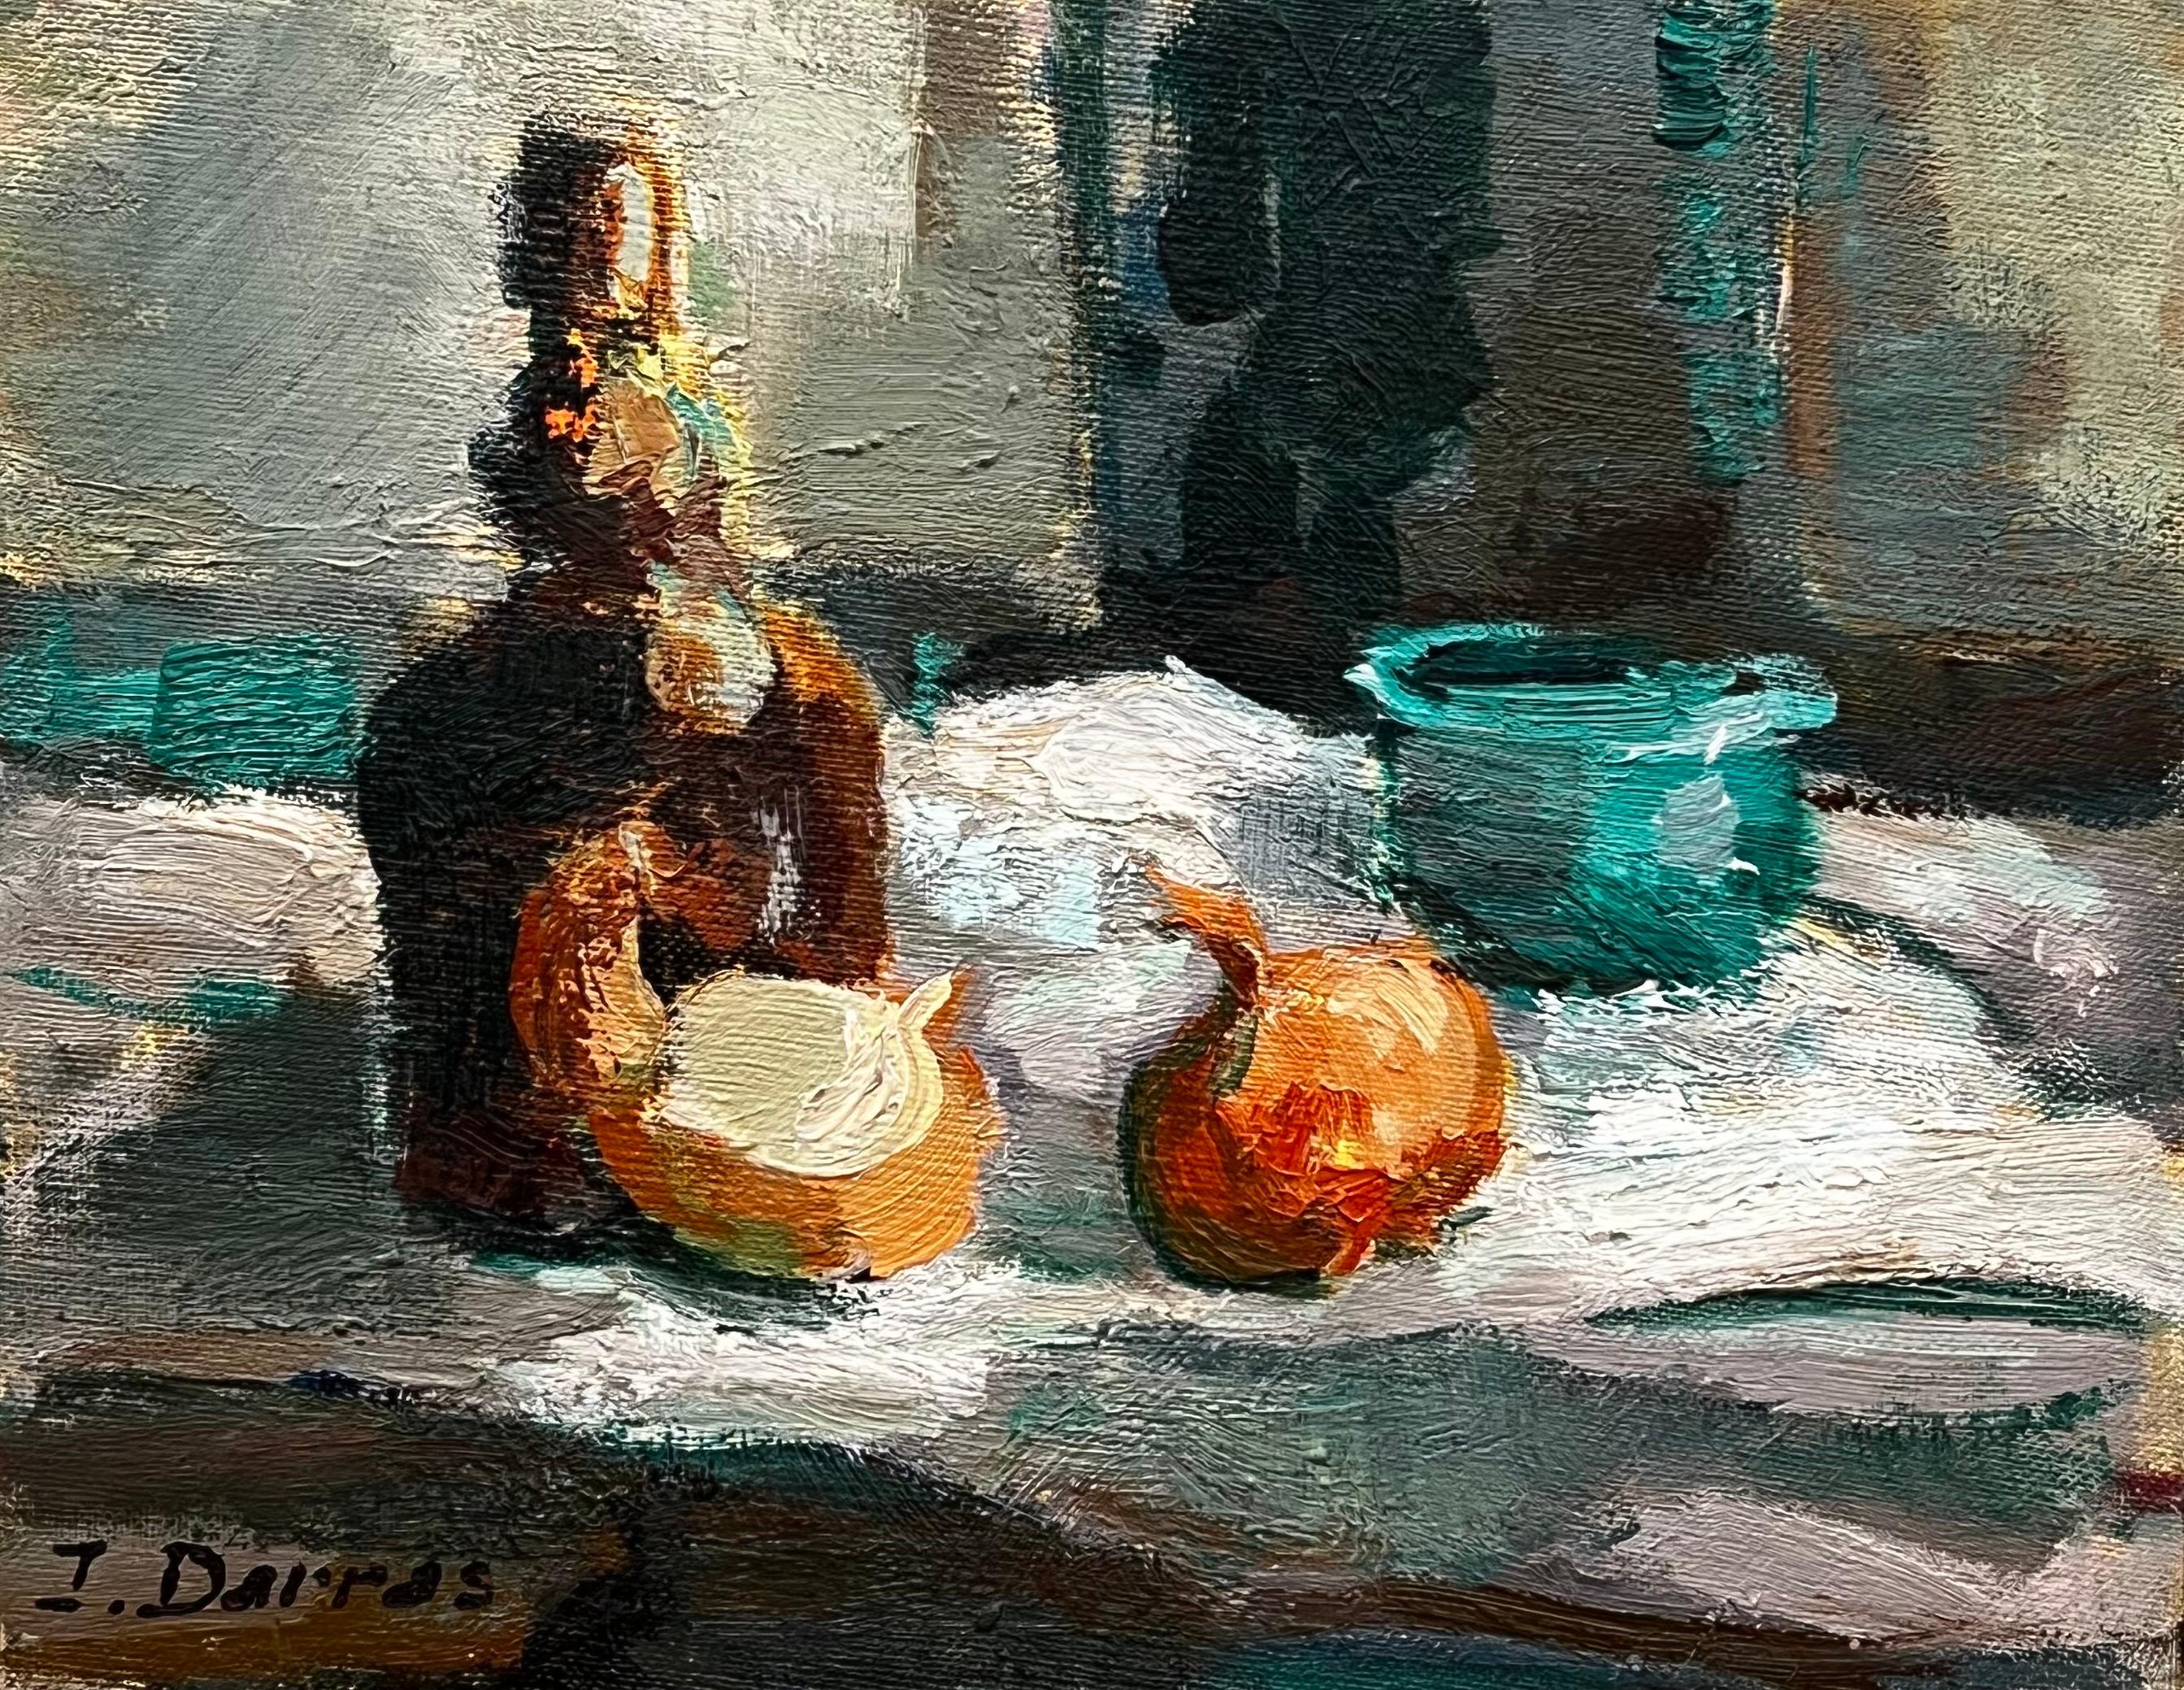 Artist/ School: J.Darras, French 20th century, signed

Title: Still Life

Medium: oil painting on board, unframed 

canvas : 7.5 x 9.5 inches

Provenance: private collection, France

Condition: The painting is in overall very good and sound